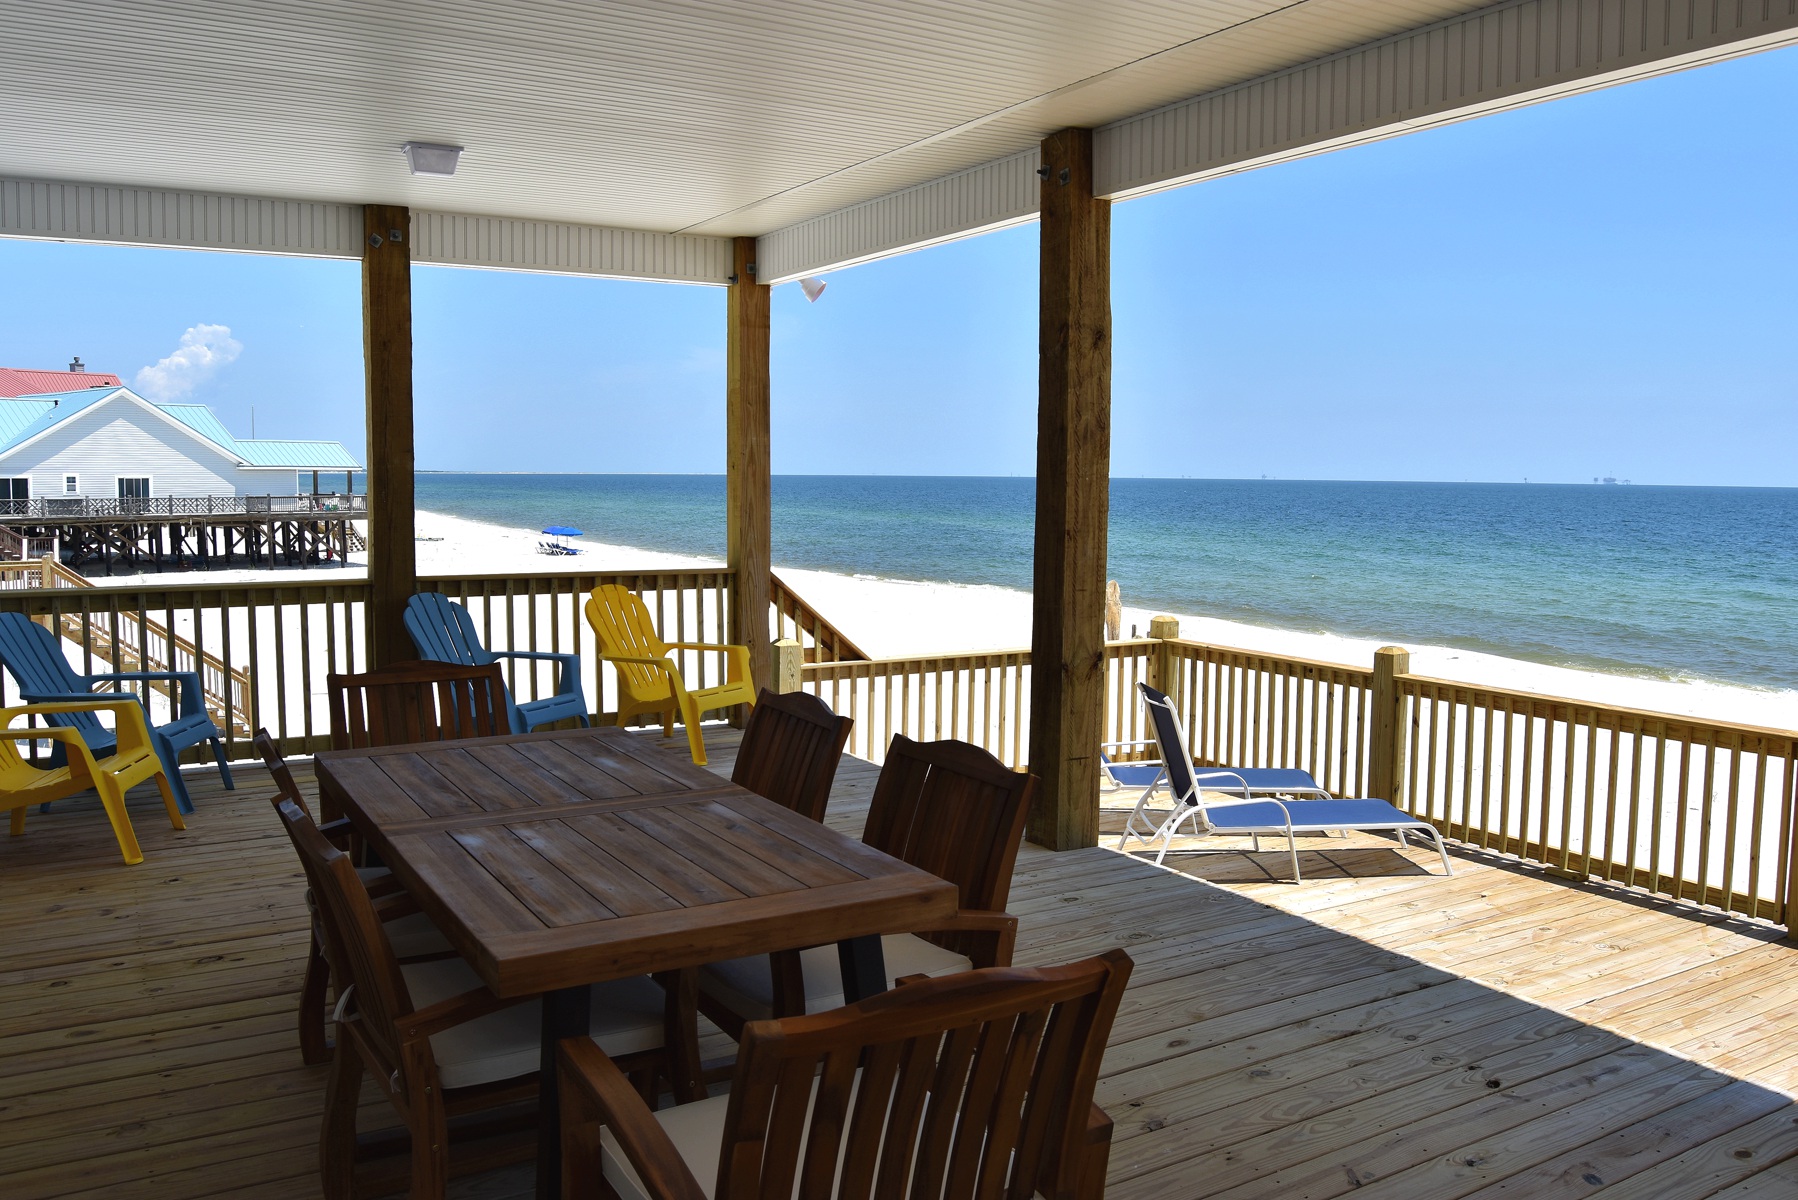 New Dauphin Island Beach Chair Rentals for Small Space